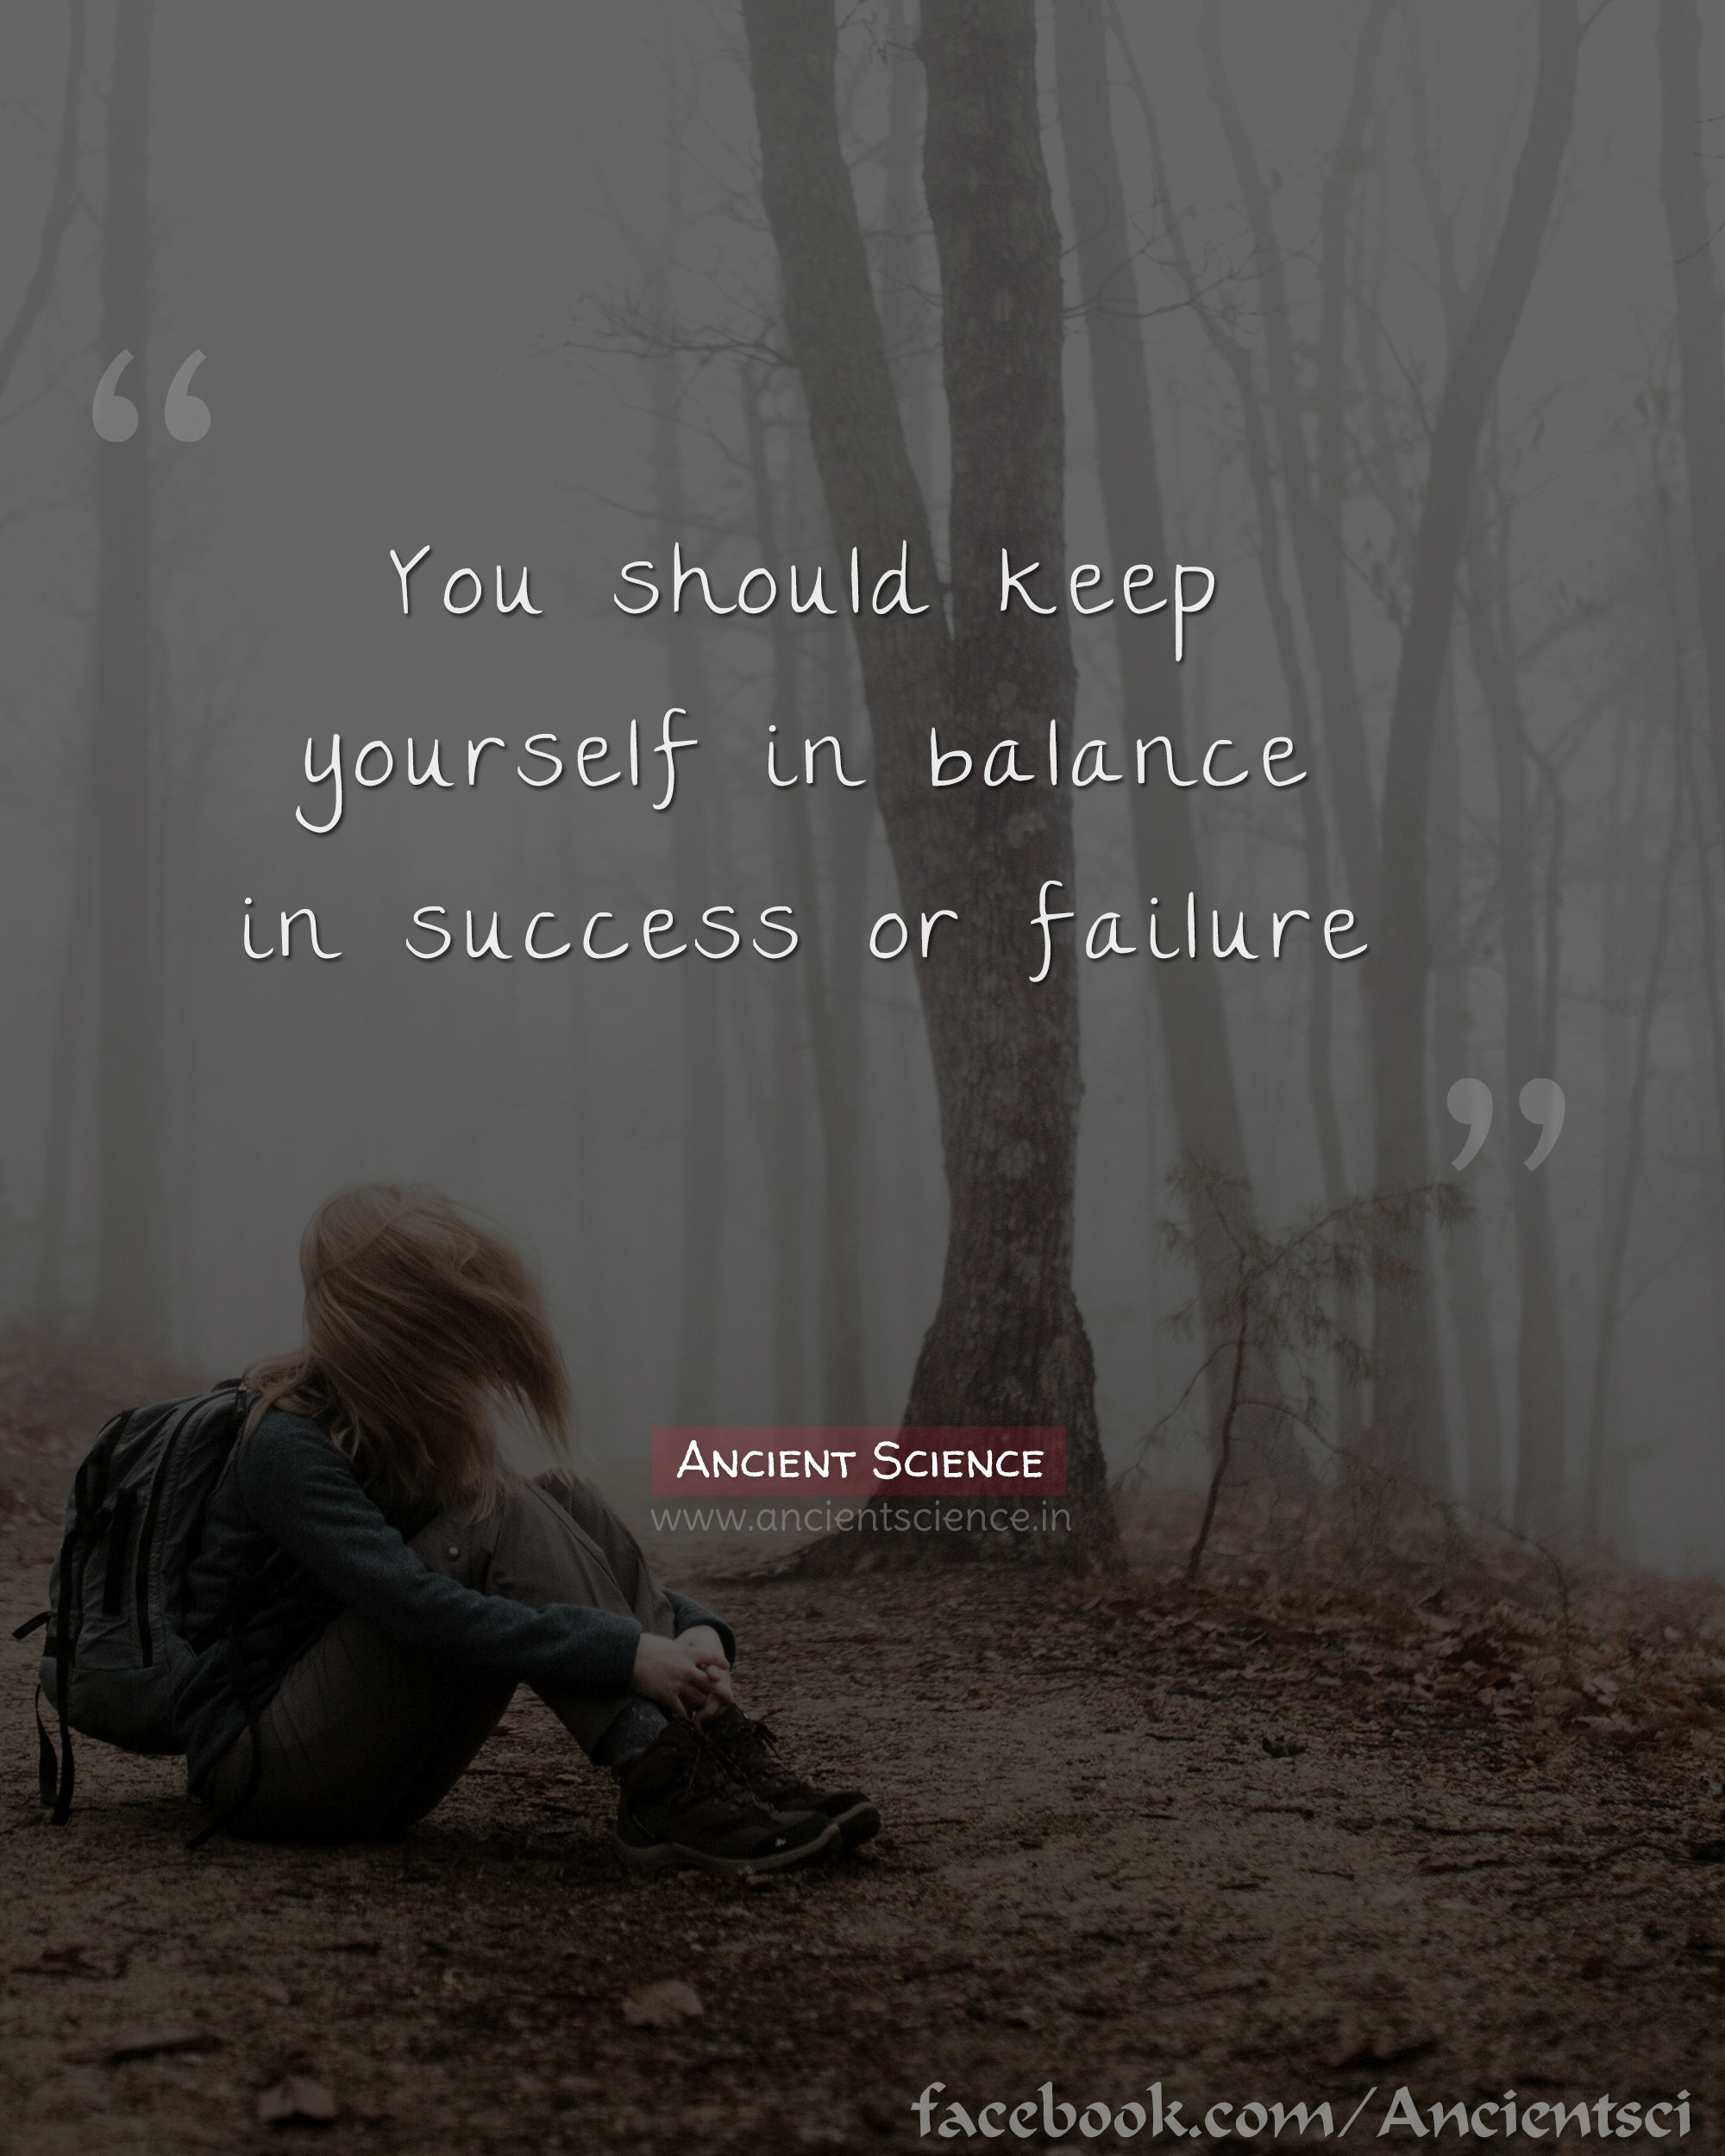 You should keep yourself in balance in success or failure.